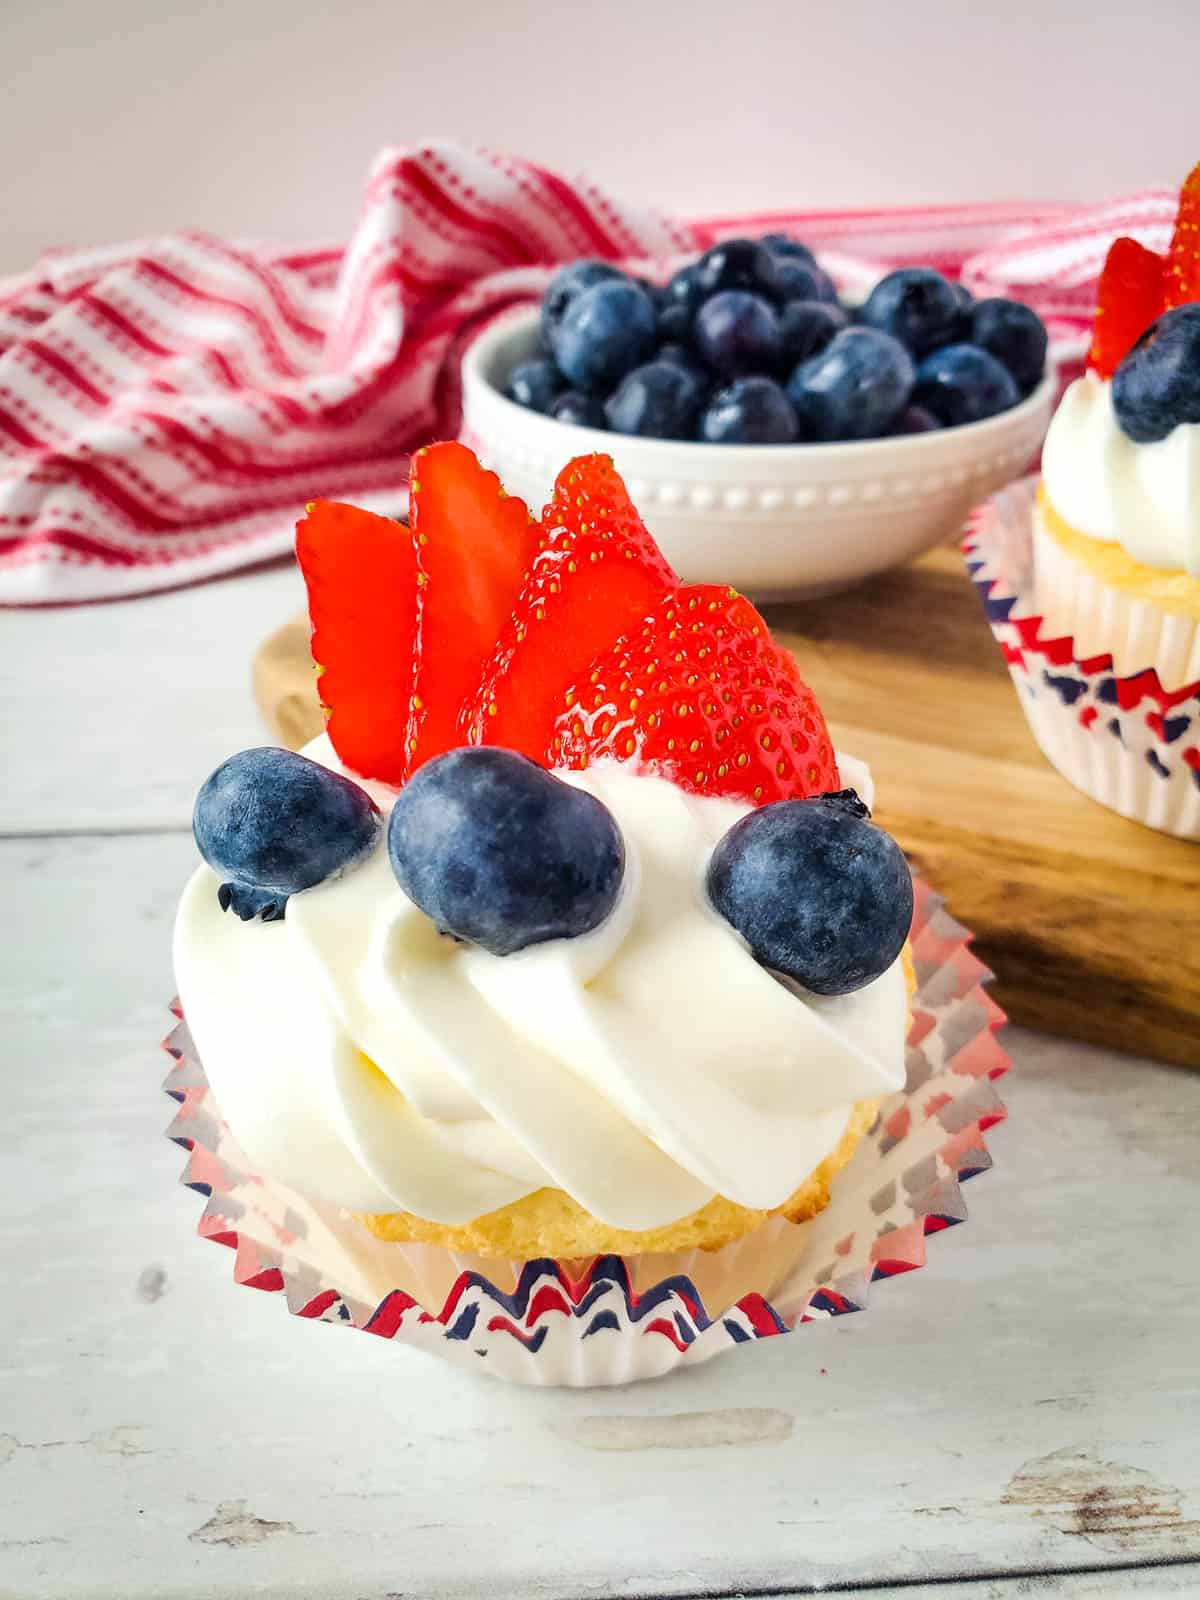 Patriotic angel food cake cupcakes that are red white and blue from berries and frosting.